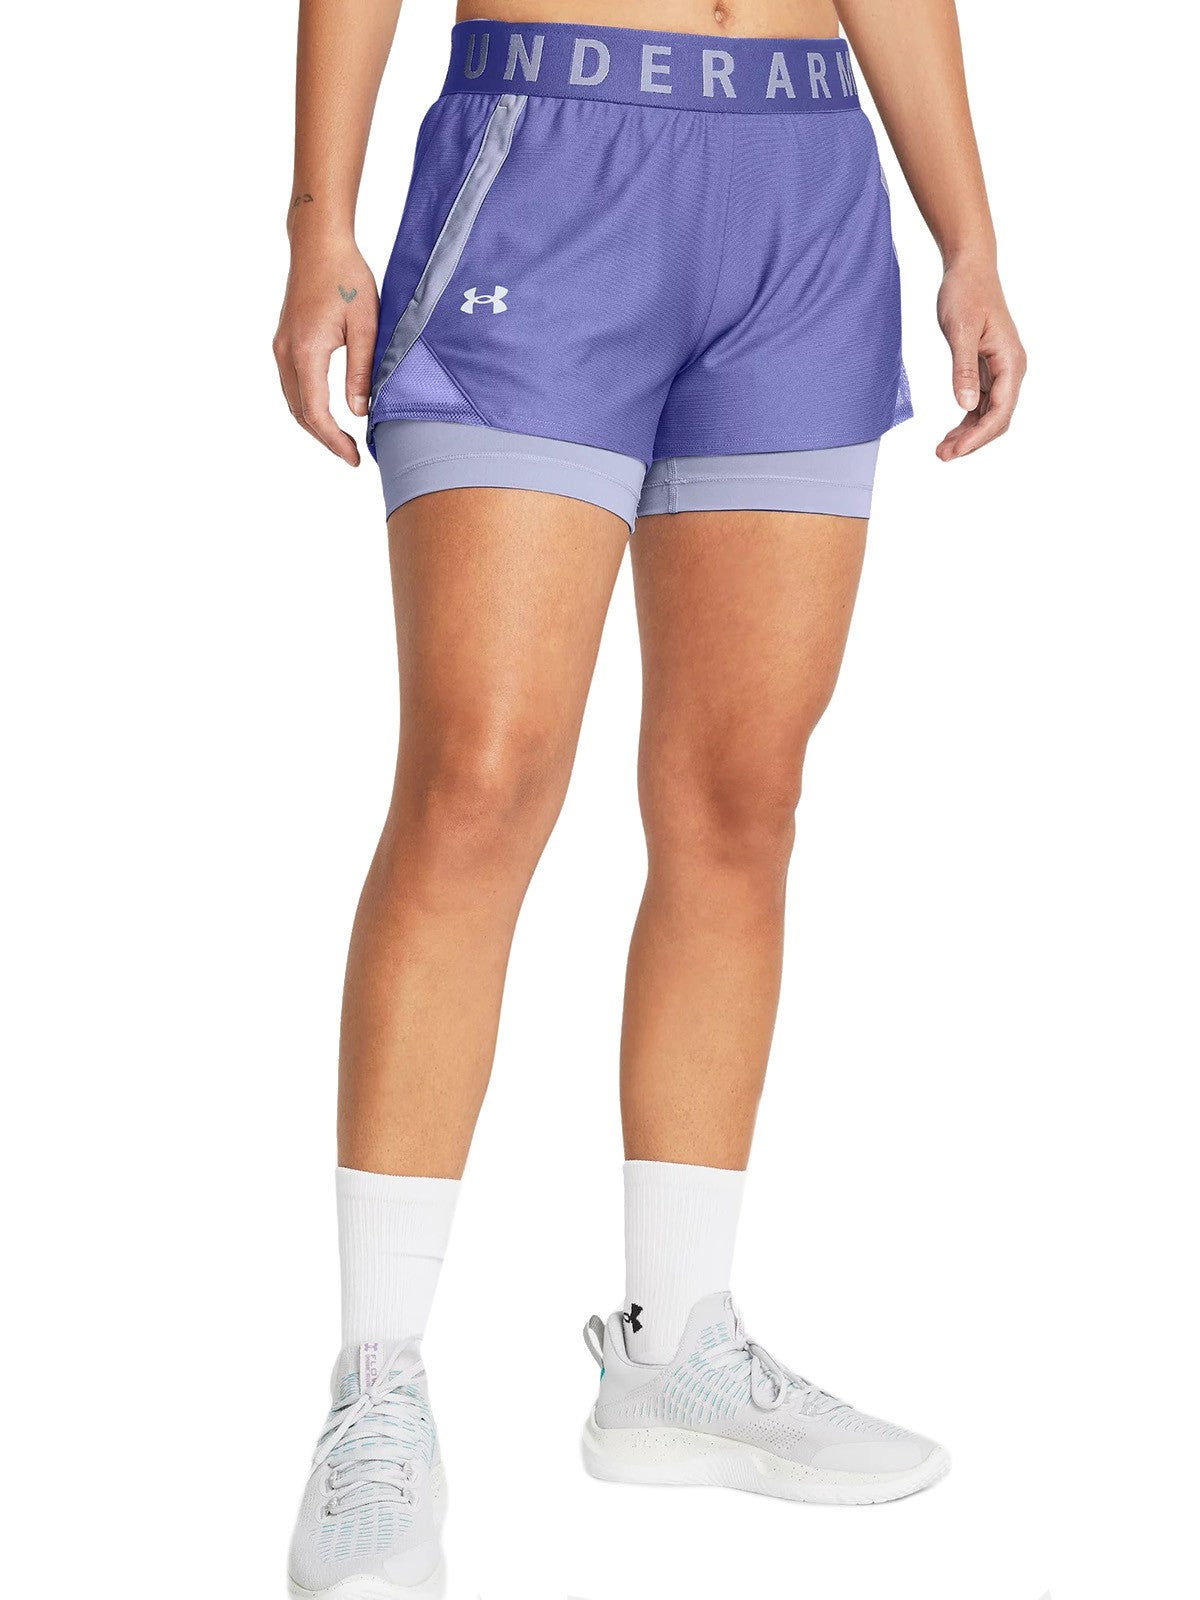 Pantaloncini Donna Under Armour - Shorts Ua Play Up 2 In 1 - Blu